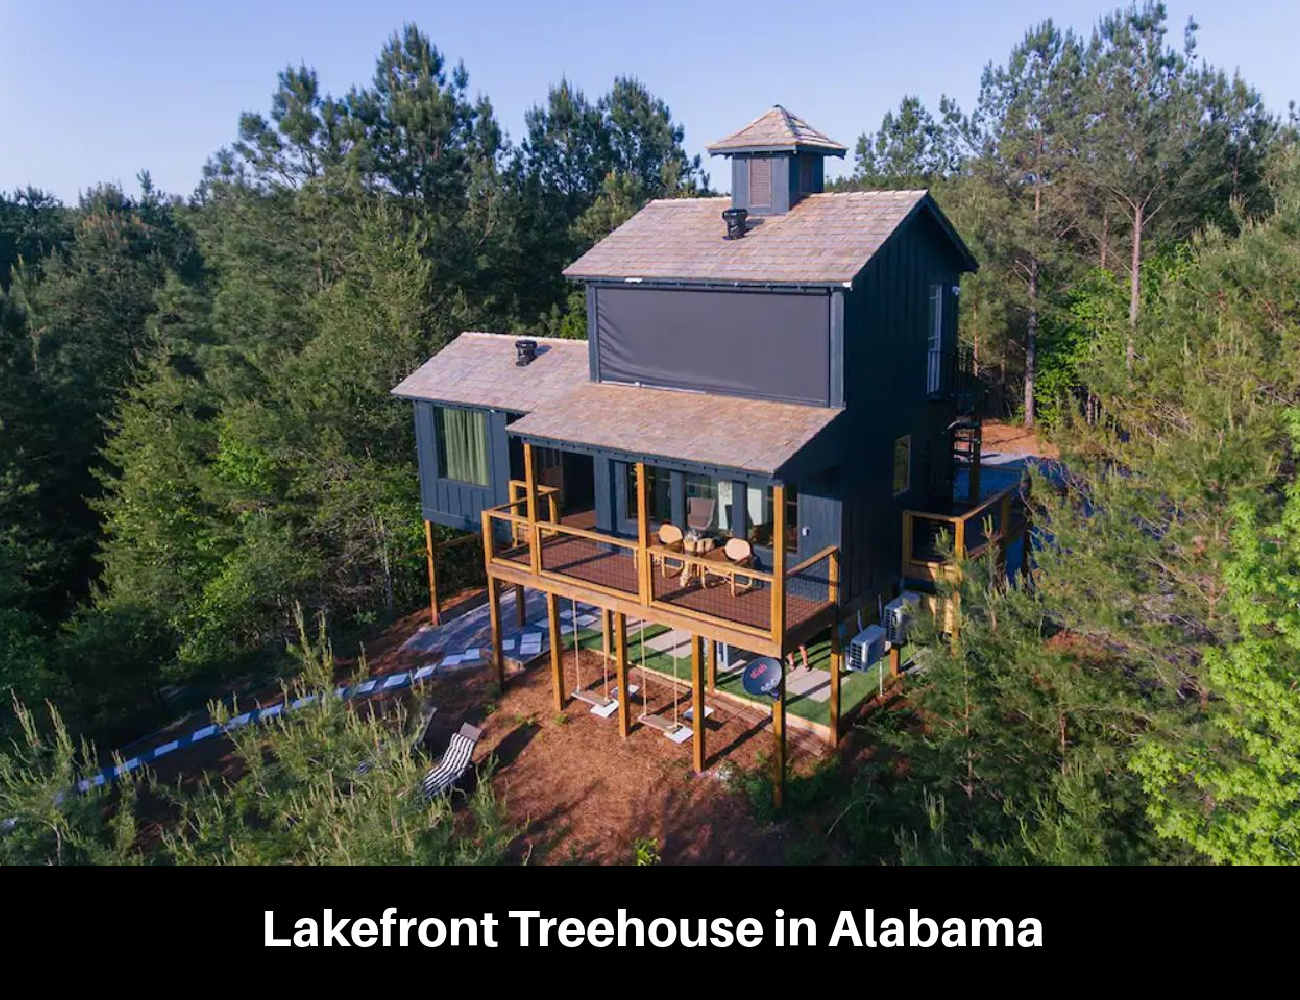 Lakefront Treehouse in Alabama